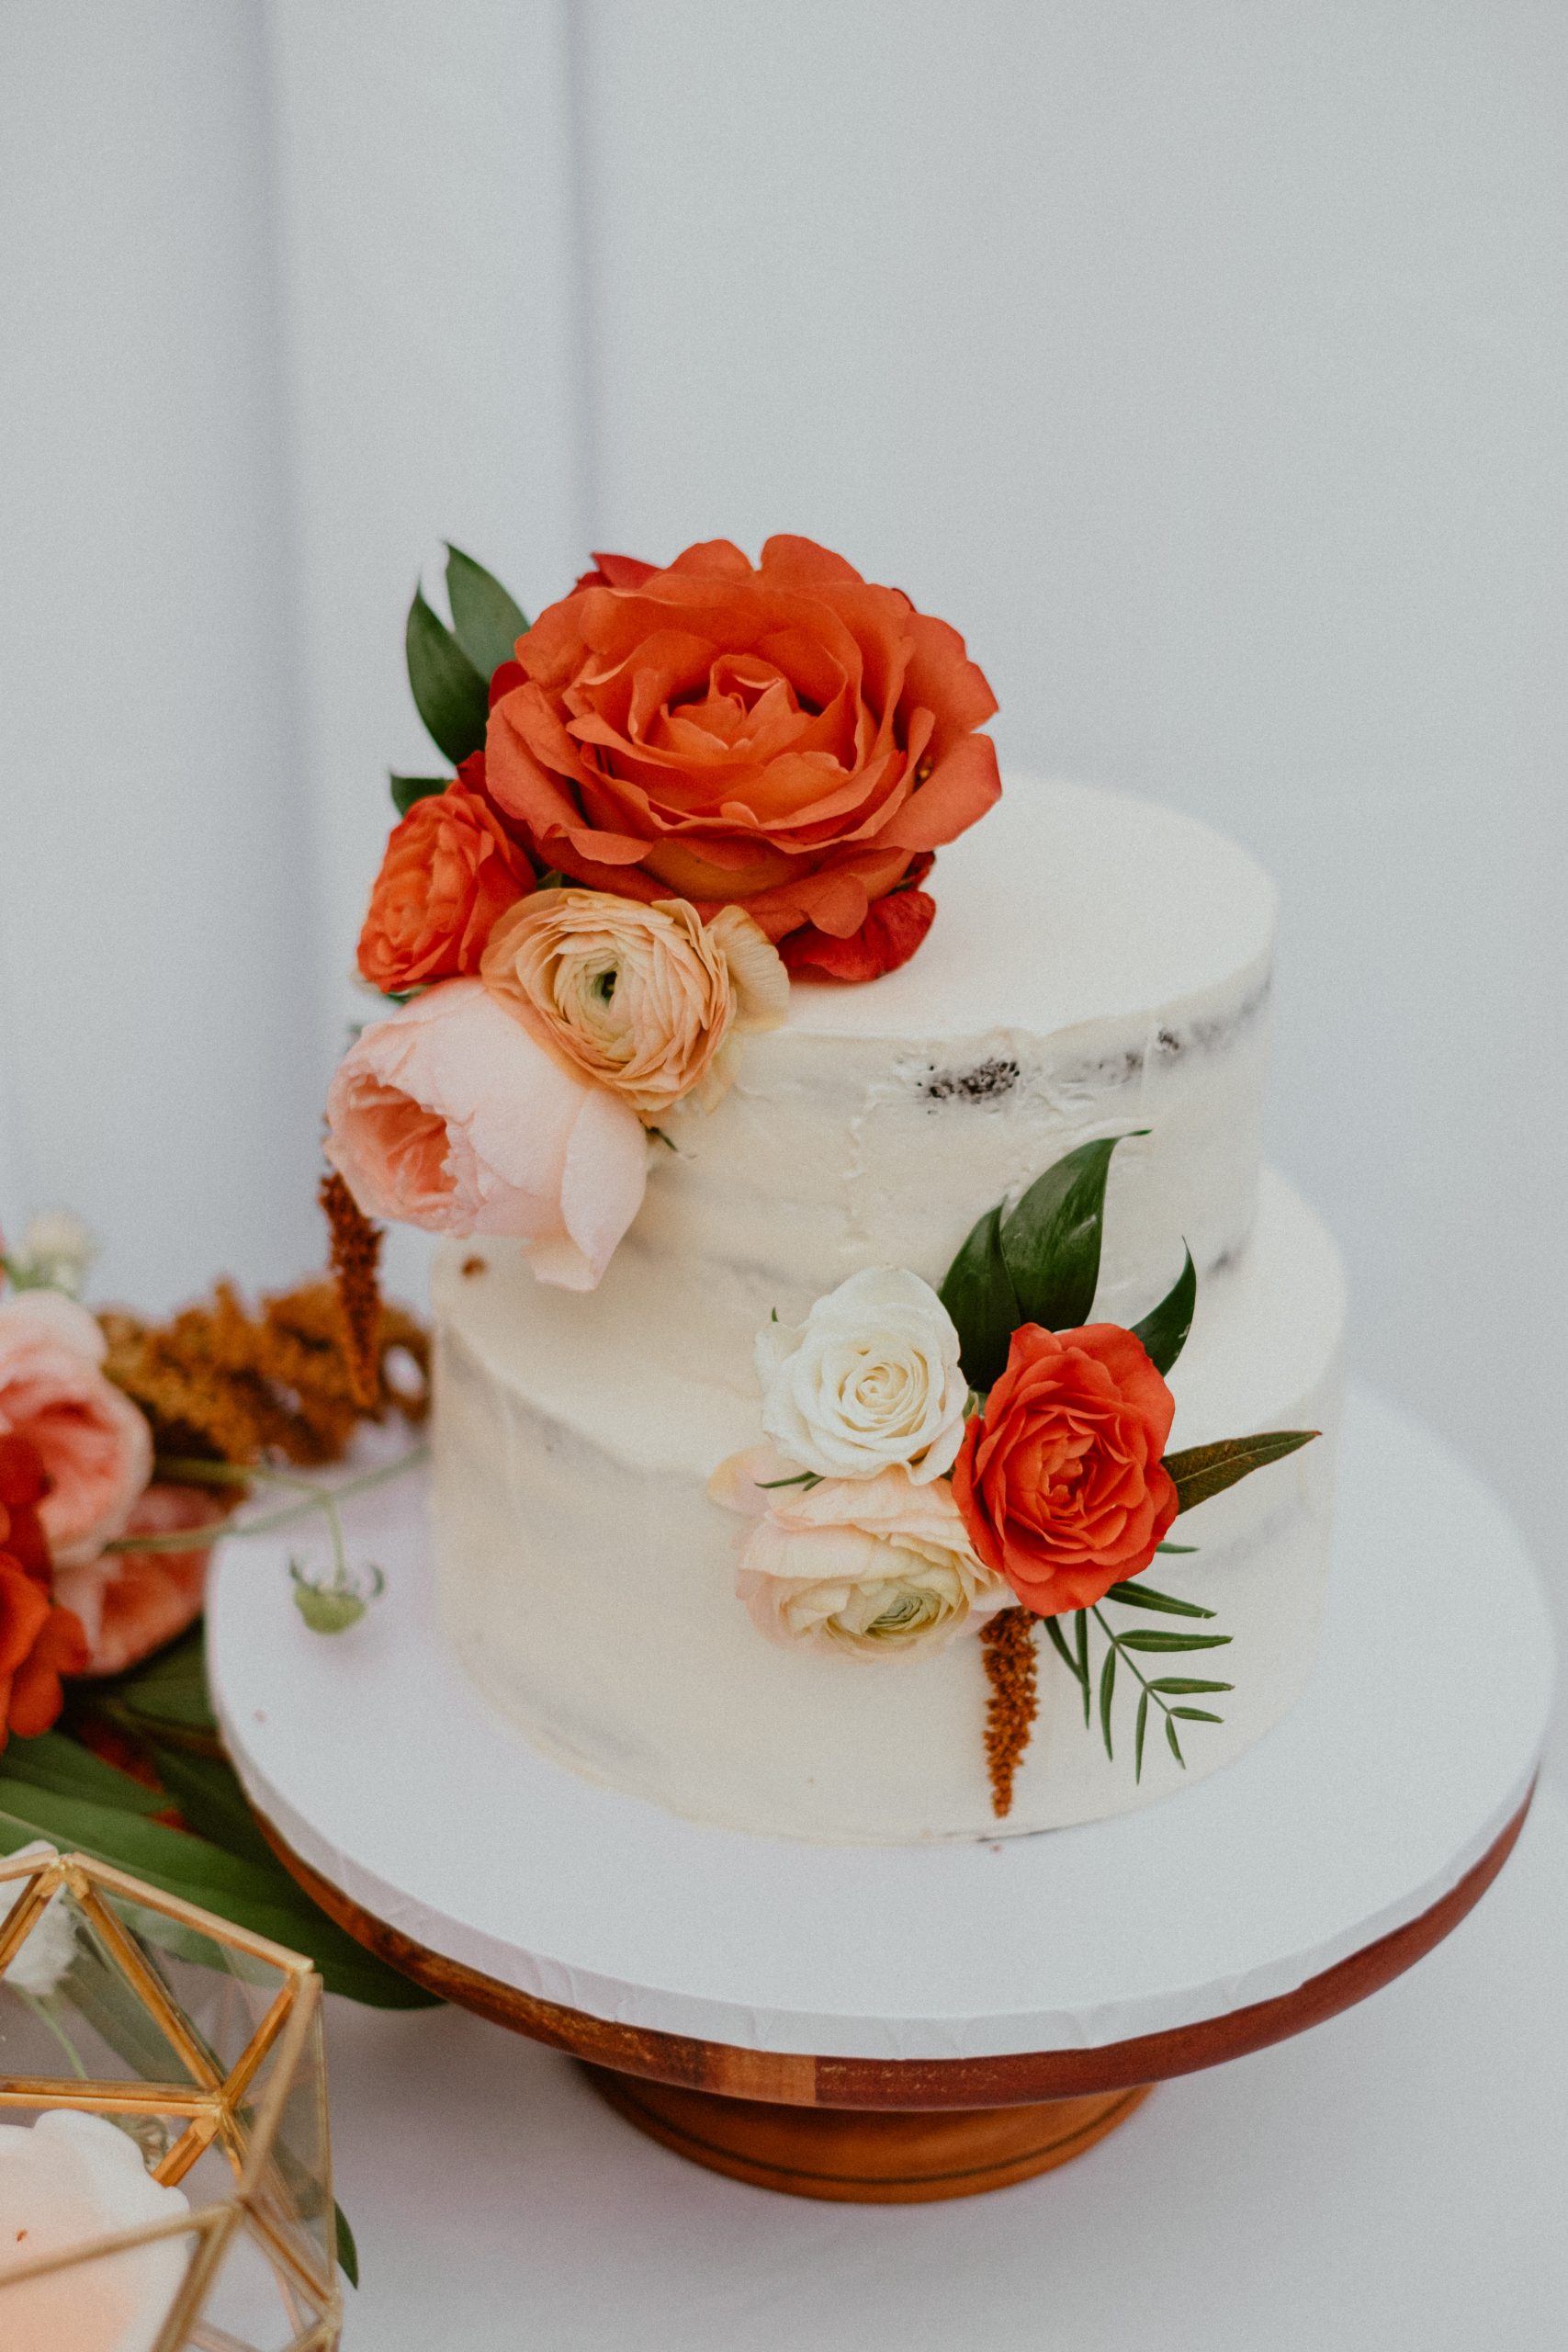 Wedding detail photography inspiration of Hawaiian fall wedding day inspiration with rustic cake with orange and peach florals | Big Island Elopement, Hawaii Elopement Photographer, Hawaii Elopement and Wedding Inspiration, Hawaii Elopement ideas, Big Island Wedding Inspiration, Fall Hawaiian Wedding Ideas, Fall Wedding Inspiration, Hawaii Outdoor Wedding Ideas | chelseaabril.com